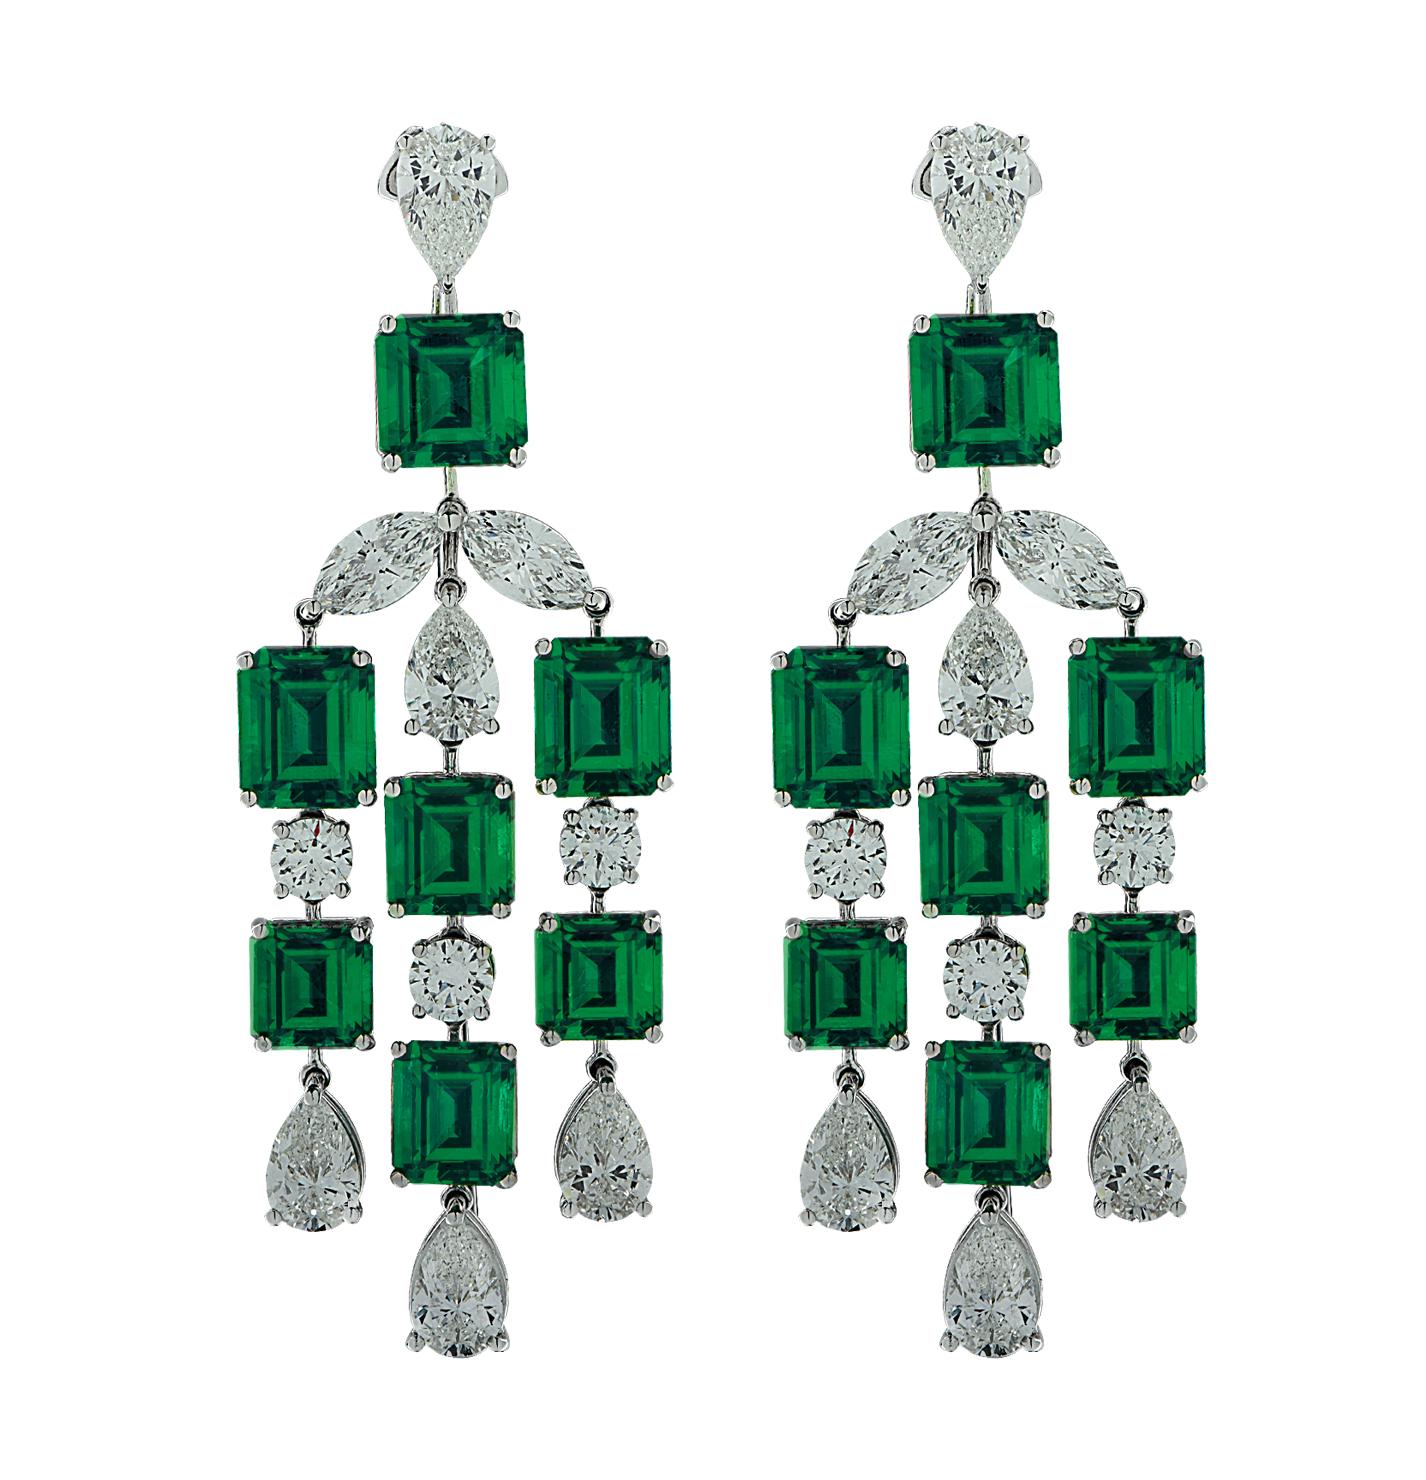 Exquisite diamond and emerald dangle earrings finely crafted in platinum, showcasing 14 emerald cut emeralds weighing approximately 23.92 carats total and 20 certified round brilliant, marquise cut and pear shape diamonds weighing approximately